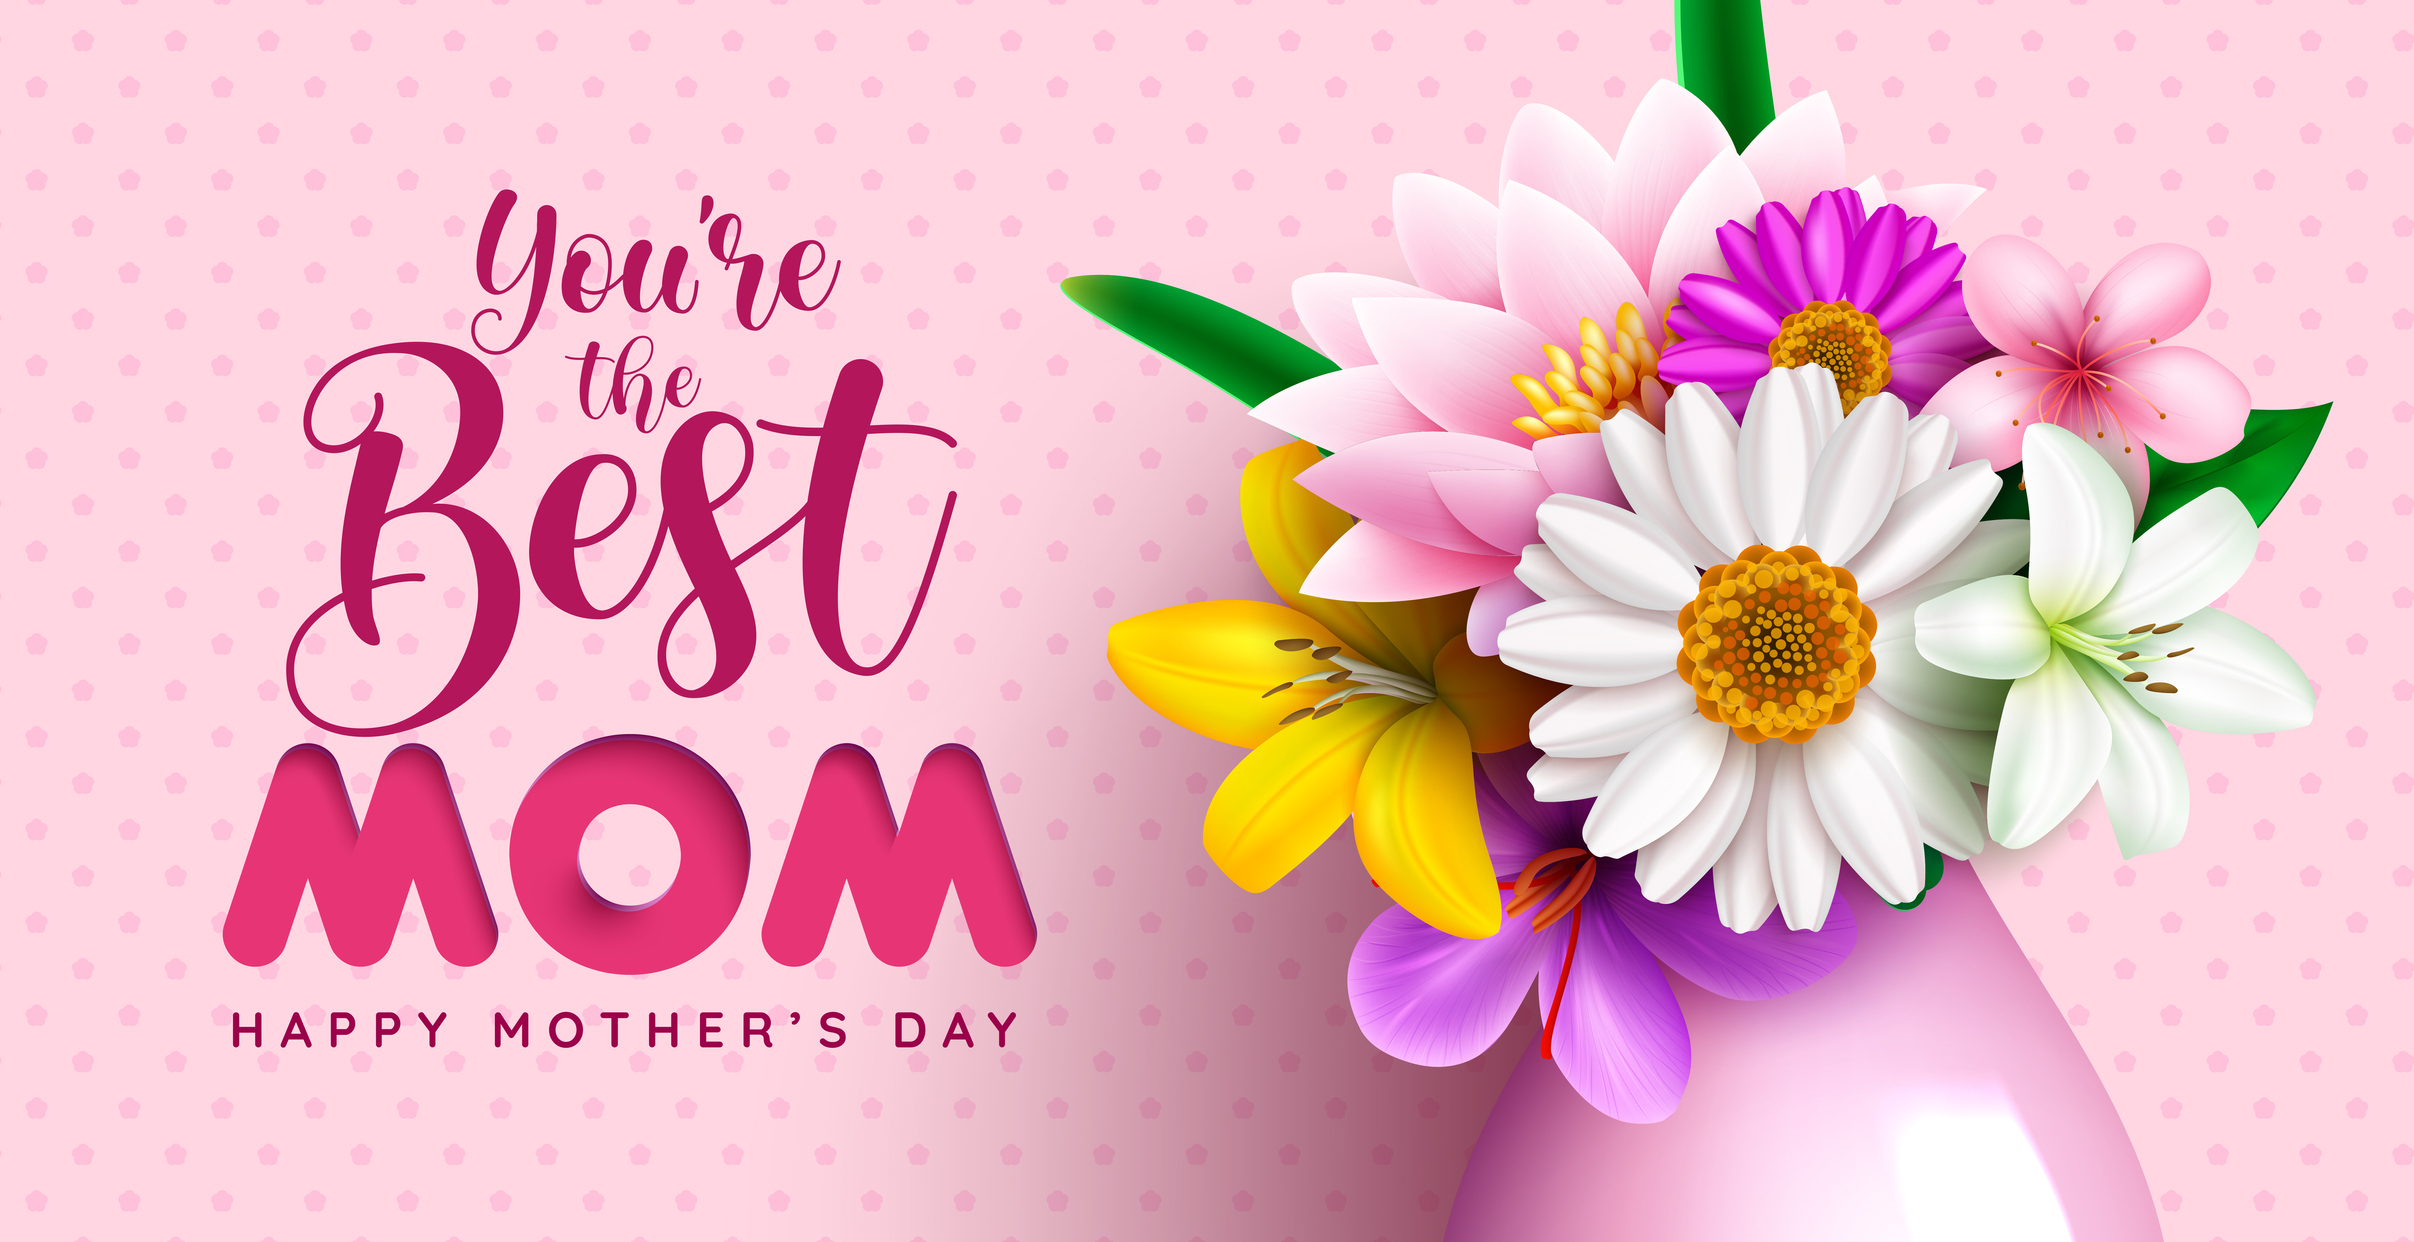 Mother’s Day means both Spring and Easter are on the way!